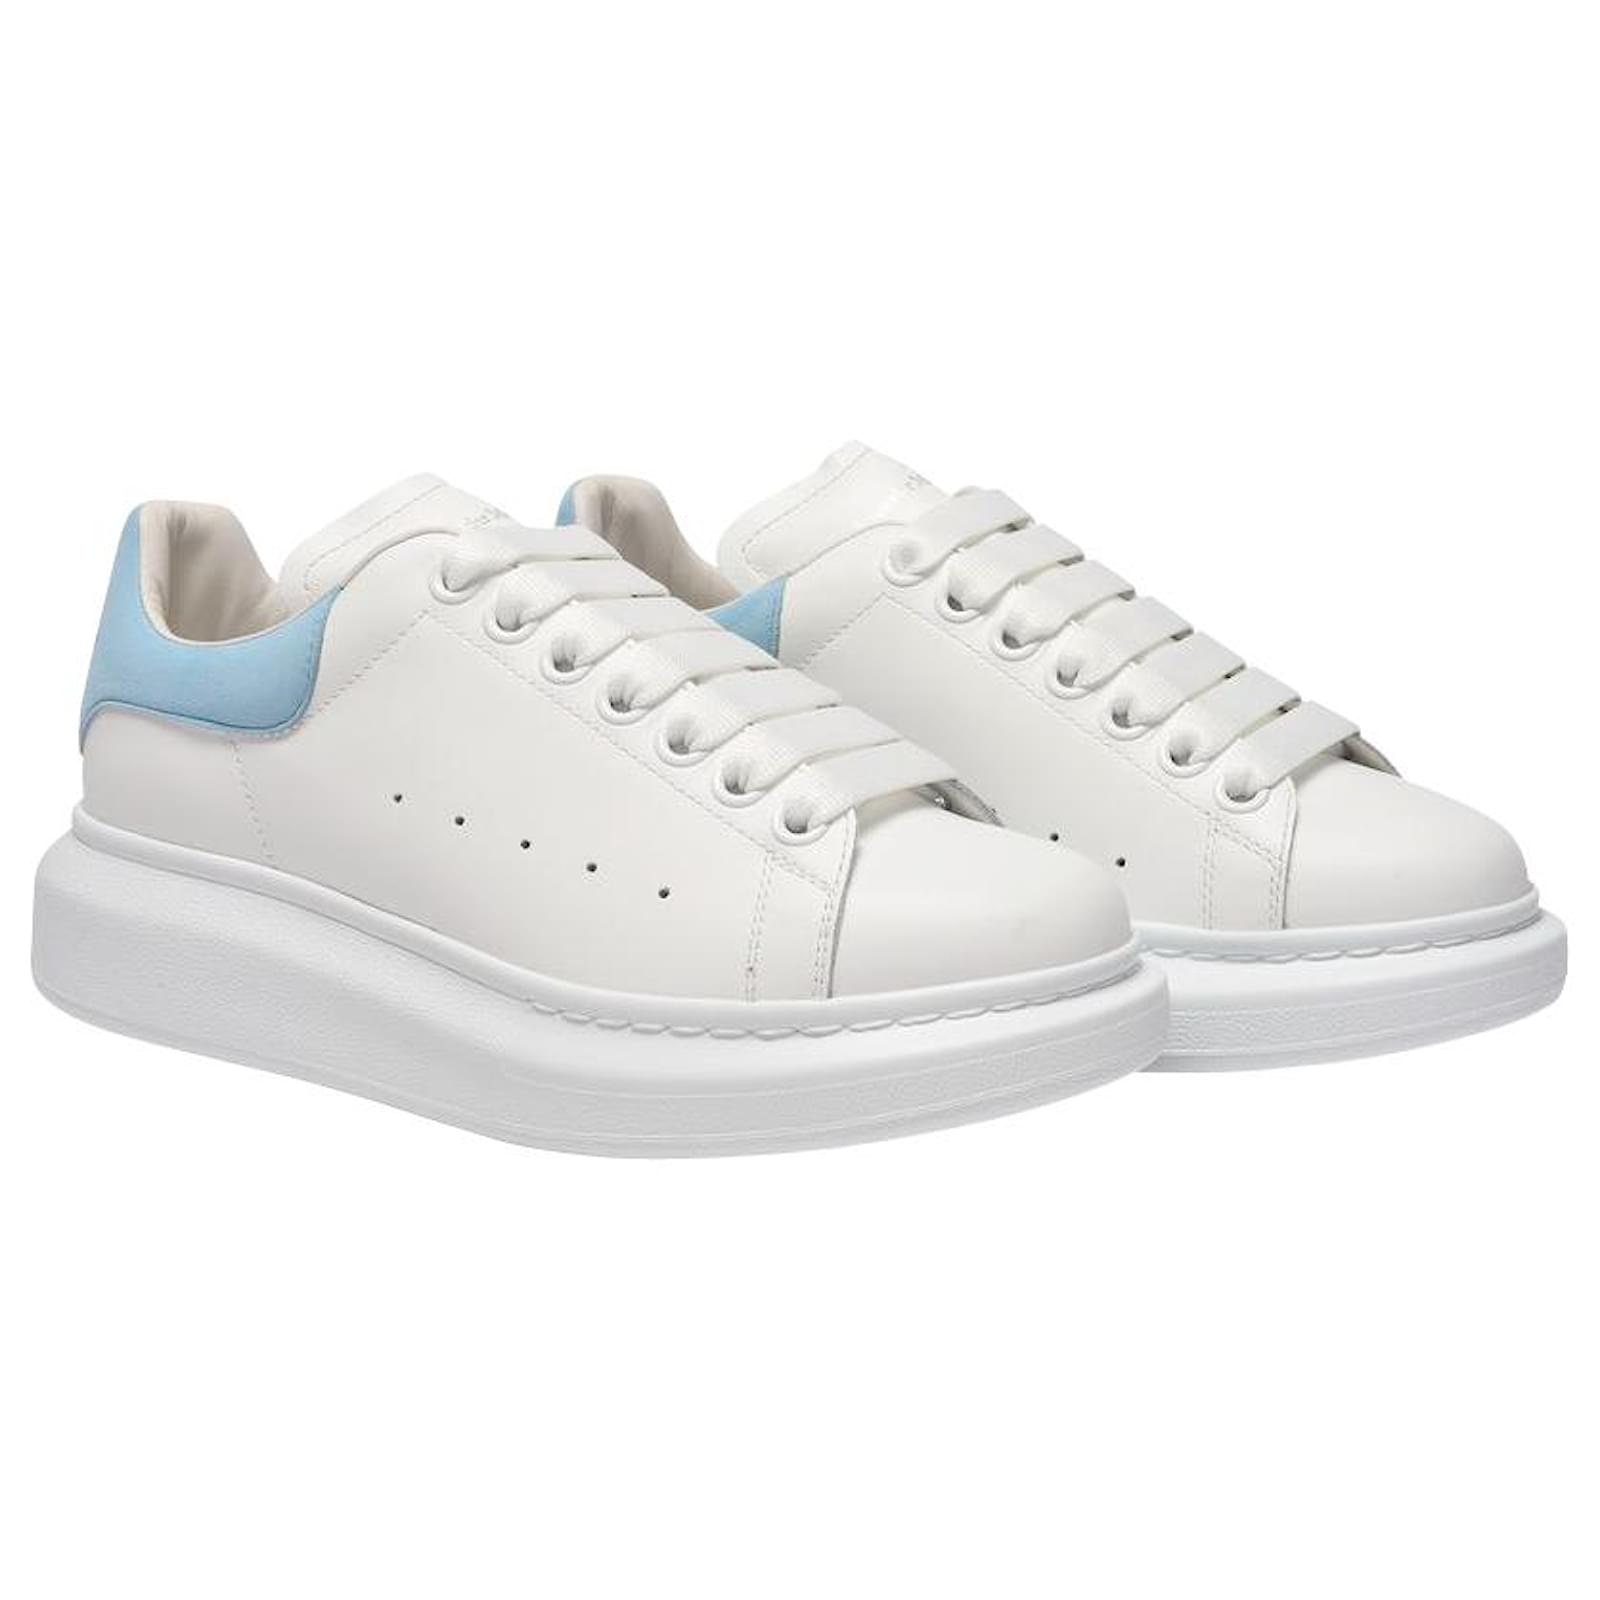 Oversized Sneakers - Alexander McQueen - White/Powder Blue - Leather